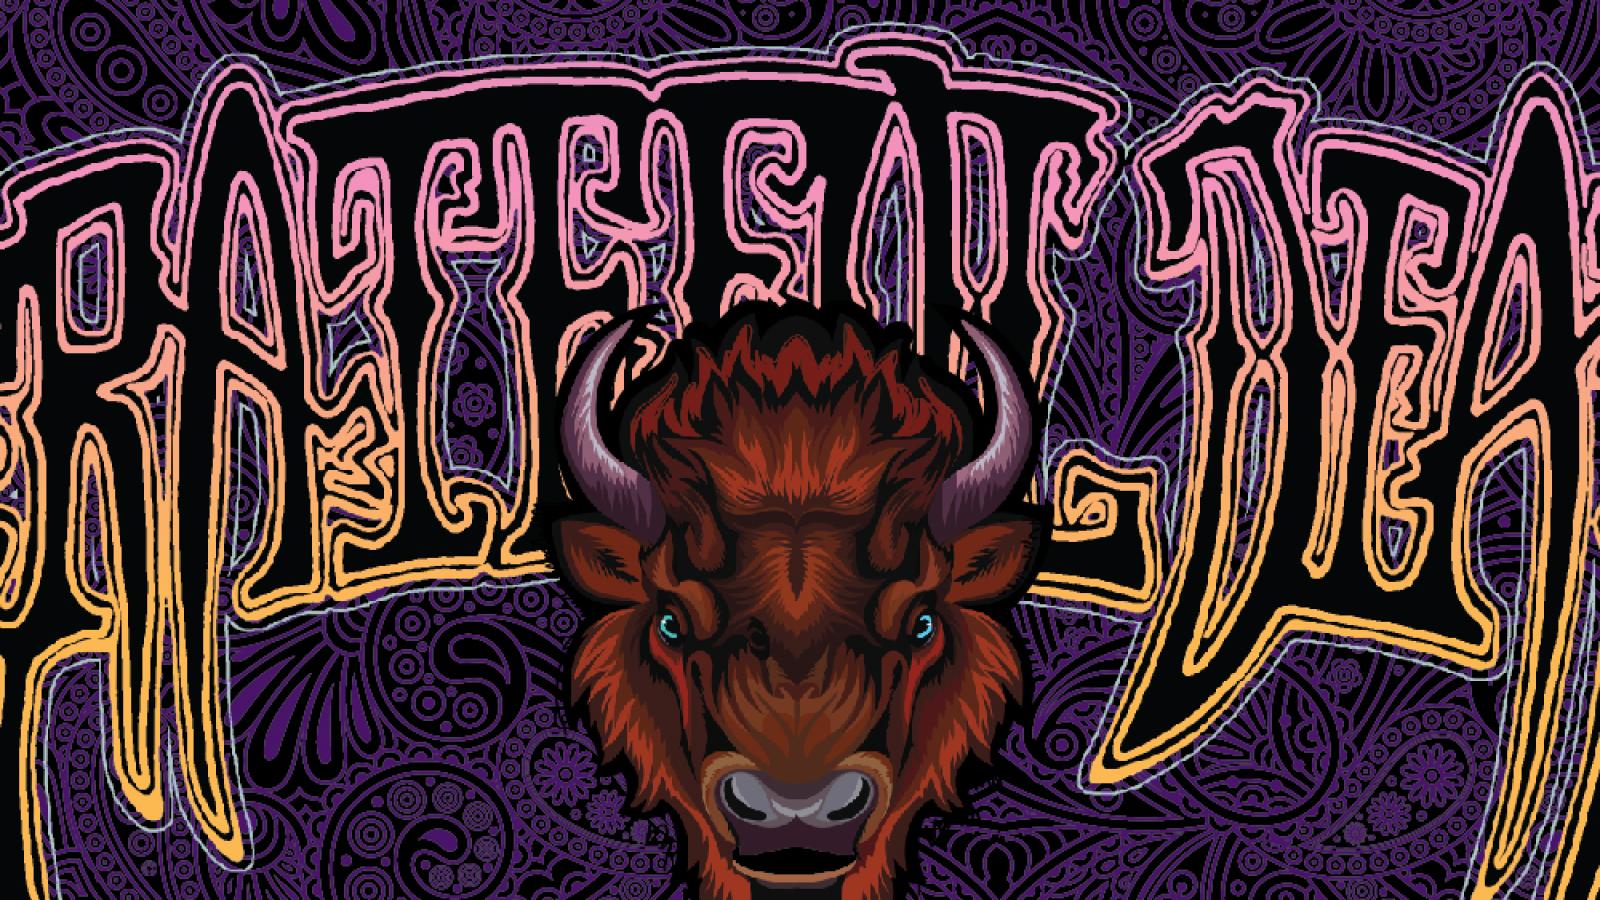 Grateful Dead text in artistic font with illustration of a buffalo head in front of a purple and black paisley background